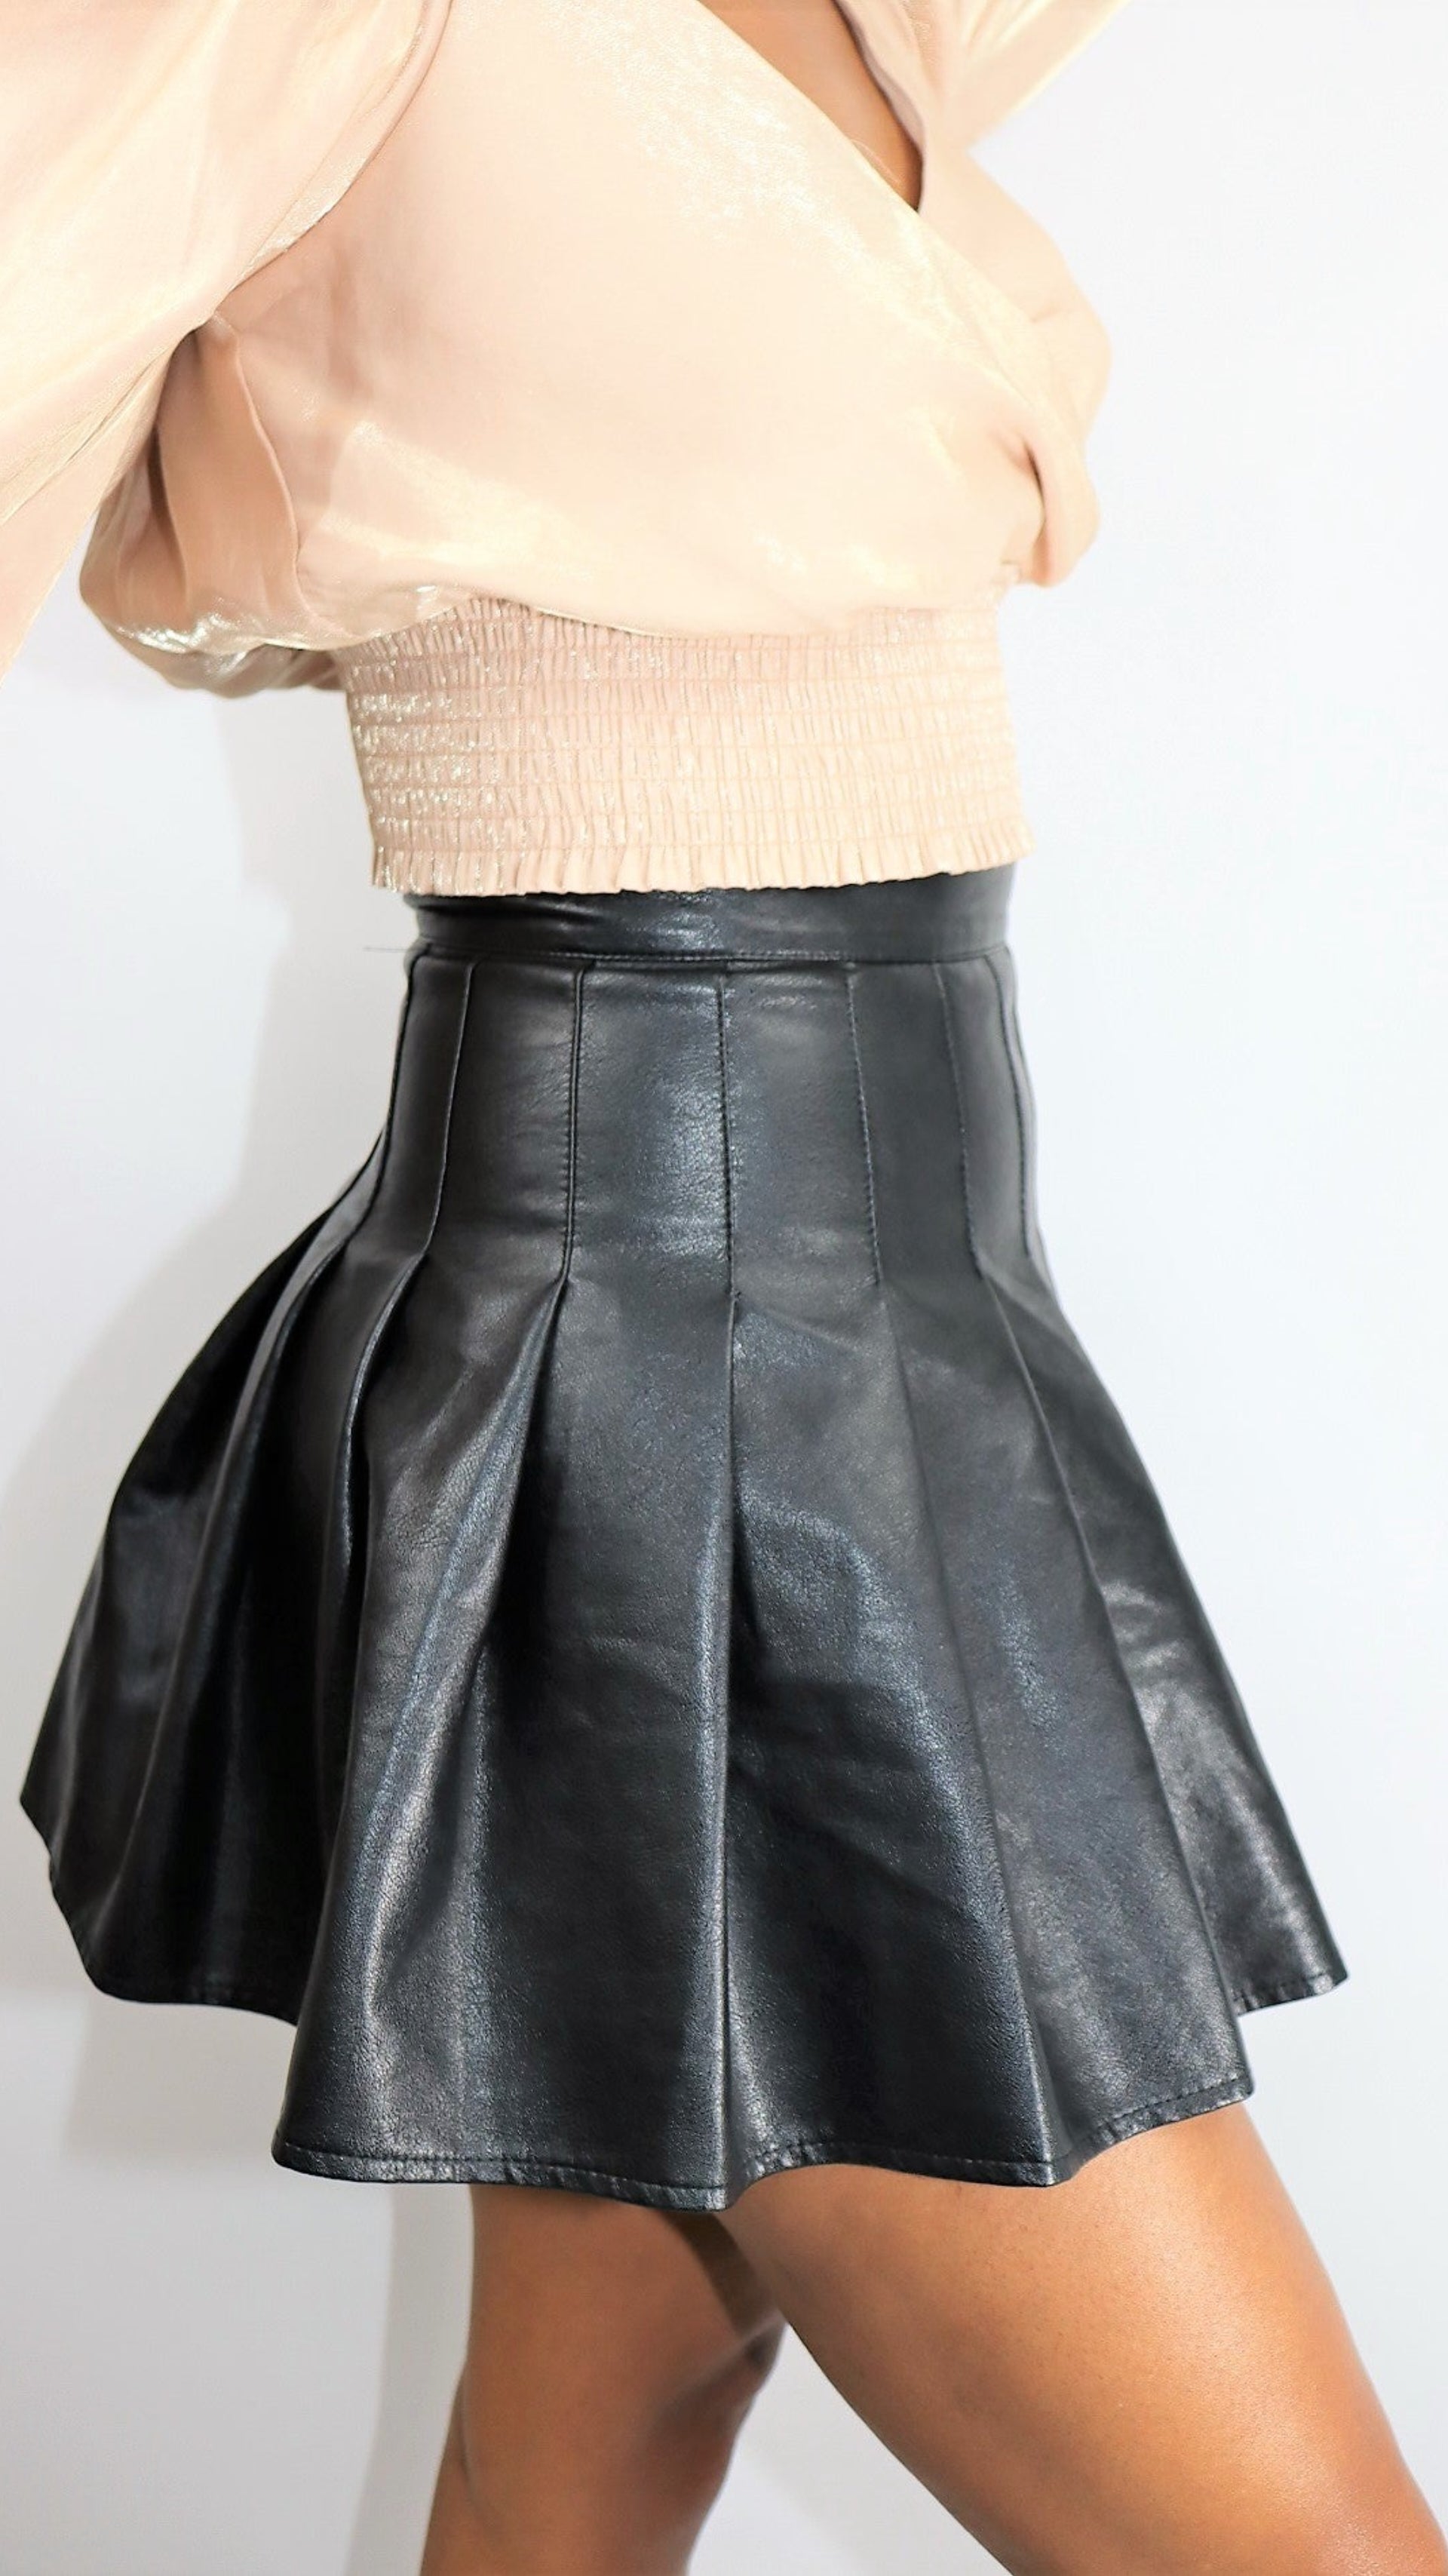 Image of: Faux leather skater skirt.